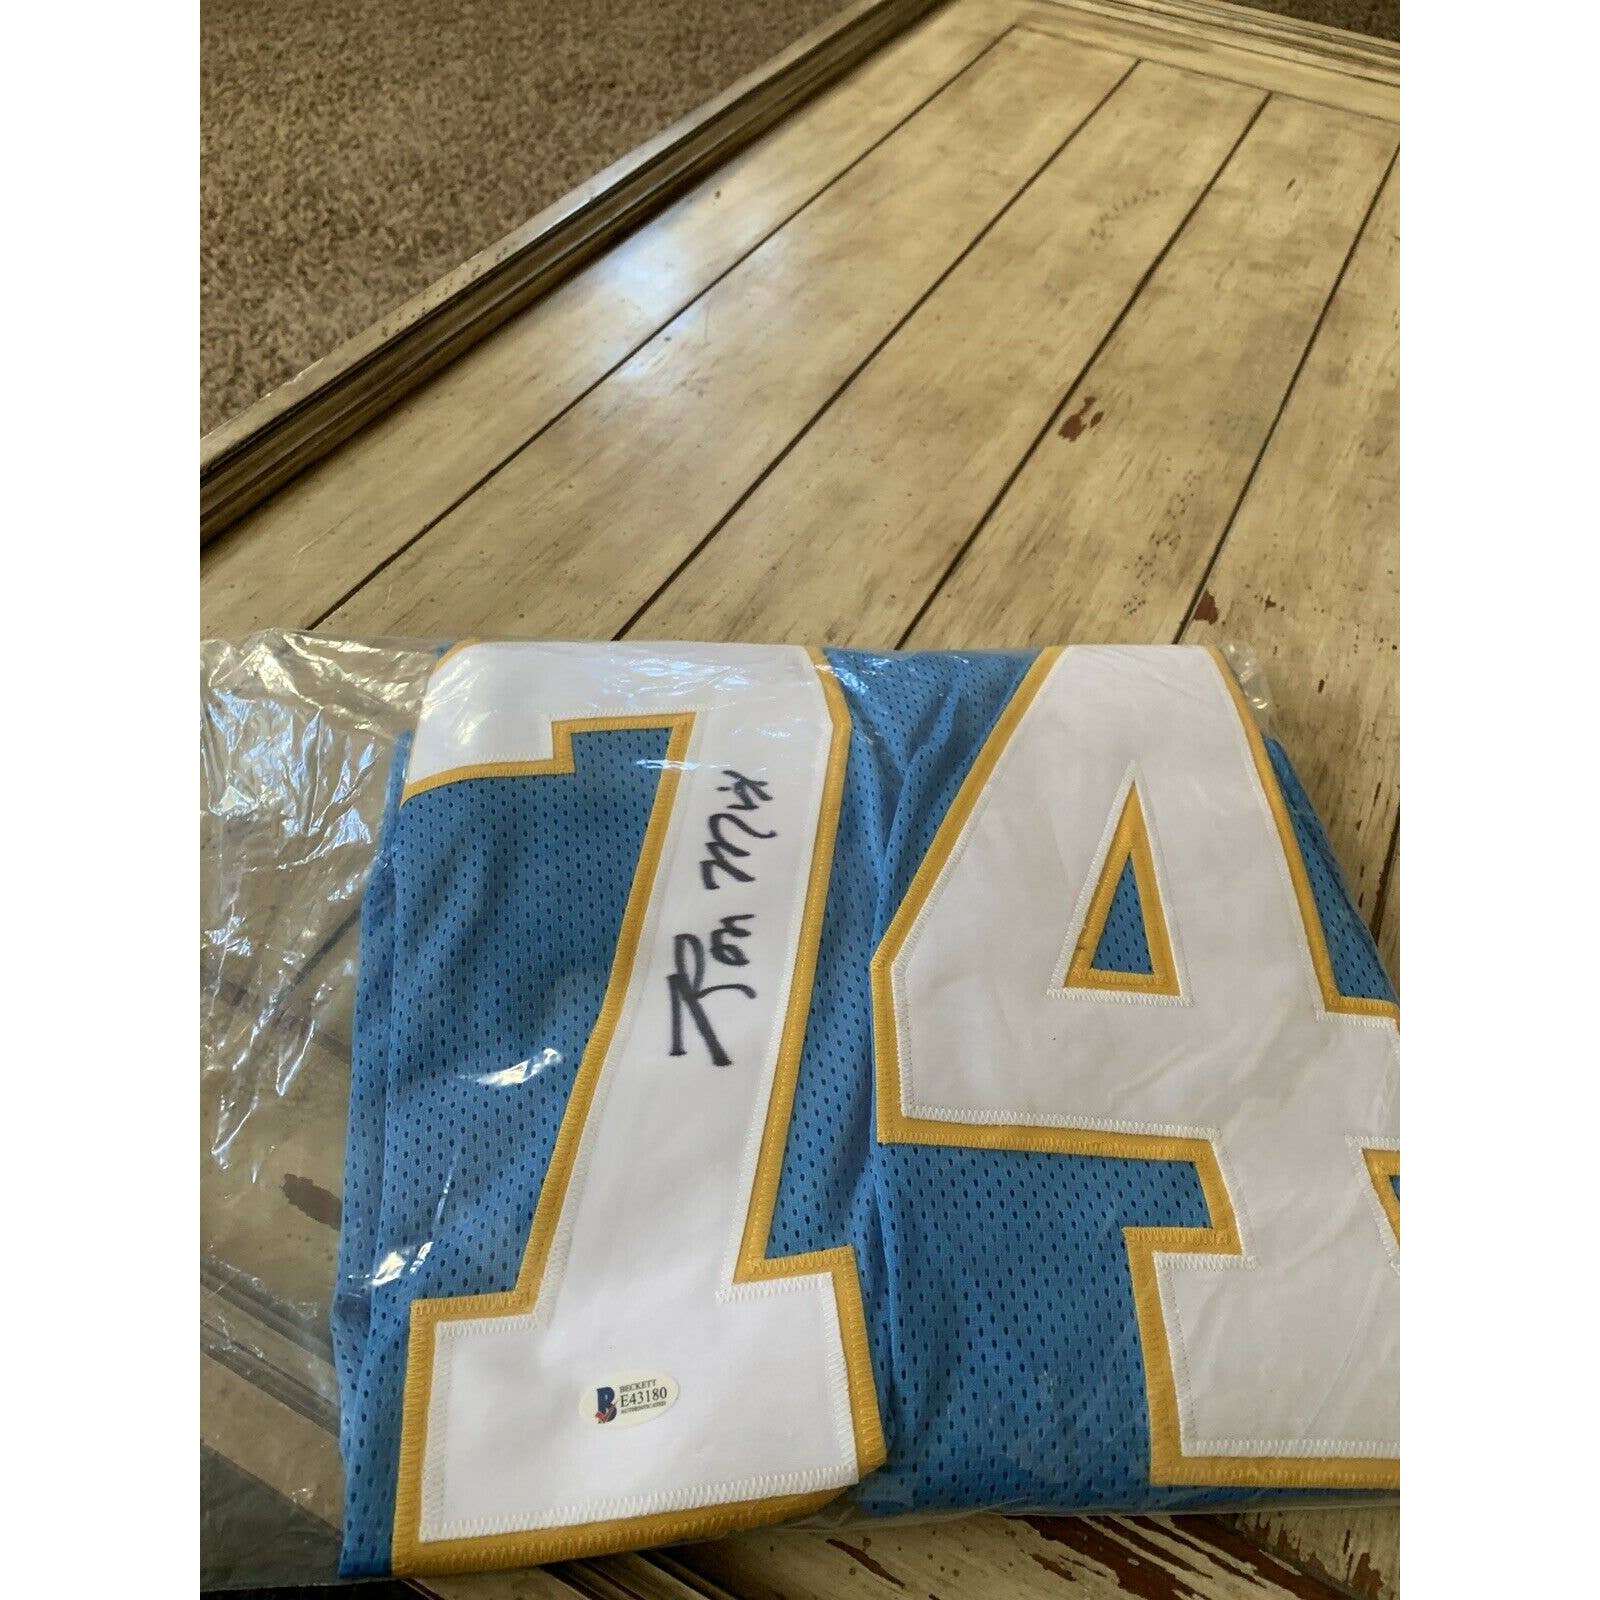 Ron Mix Autographed/Signed Jersey Beckett COA San Diego Chargers Los Angeles - TreasuresEvolved